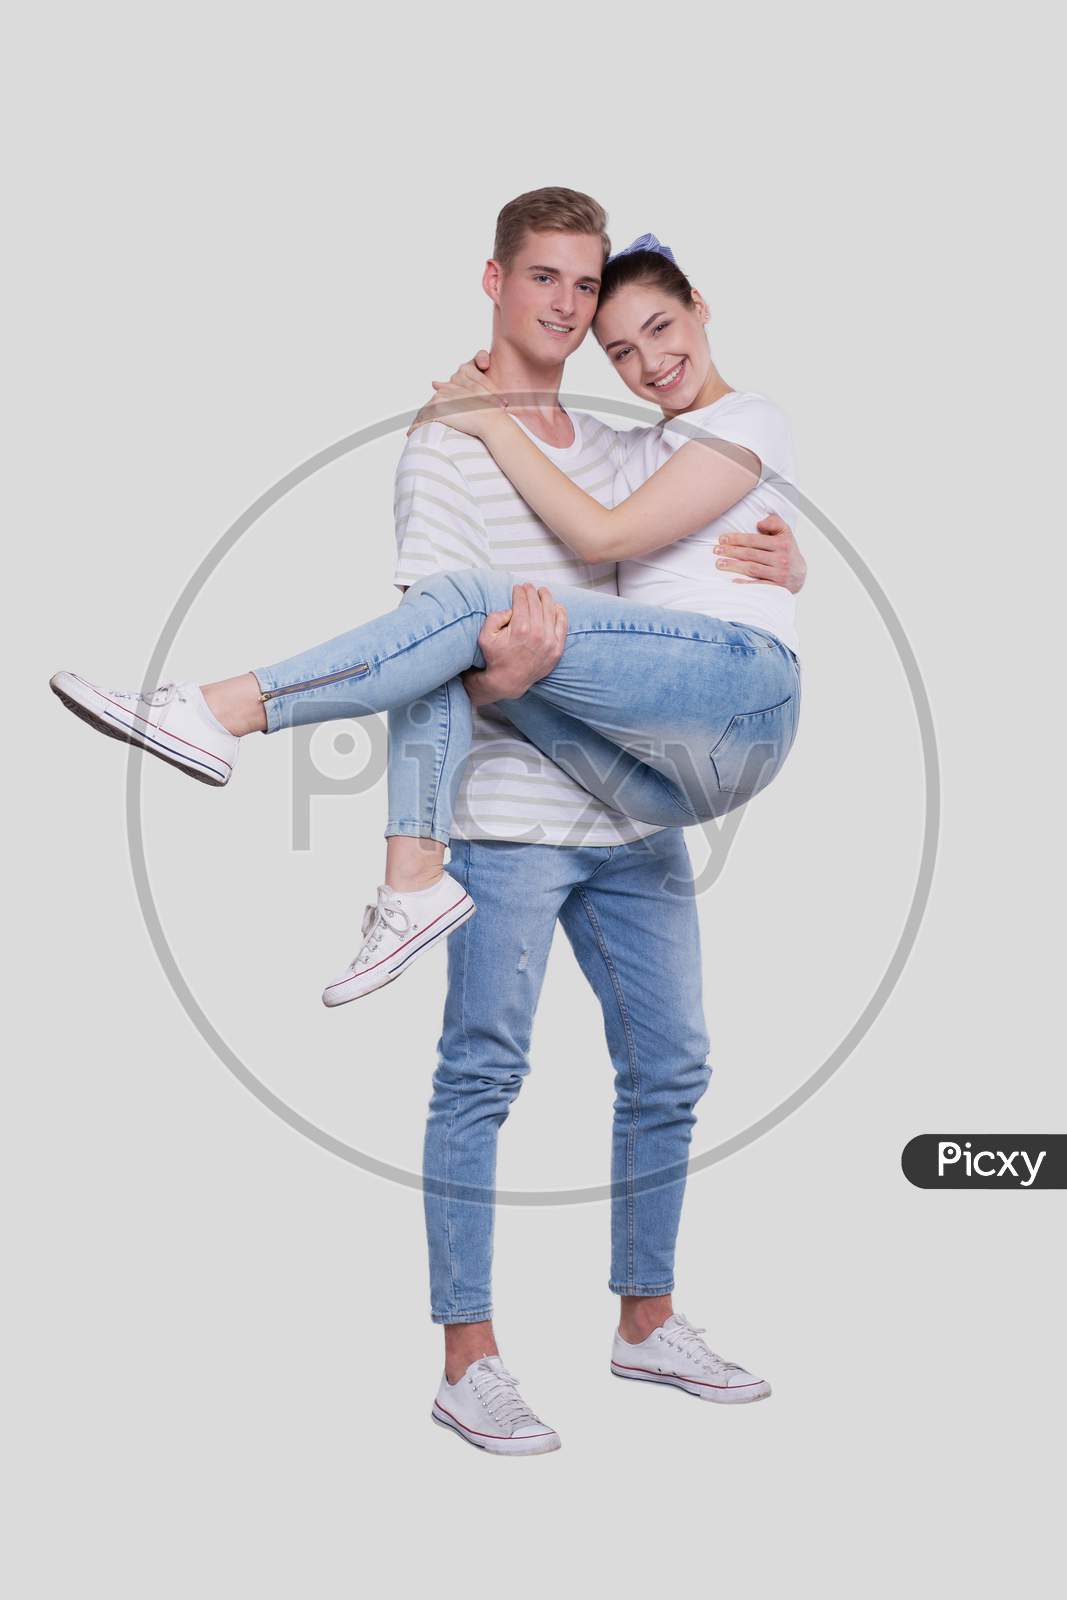 Man Holding Girl In His Arms. Couple Standing Isolated. Lovely Couple Looking To The Camera.